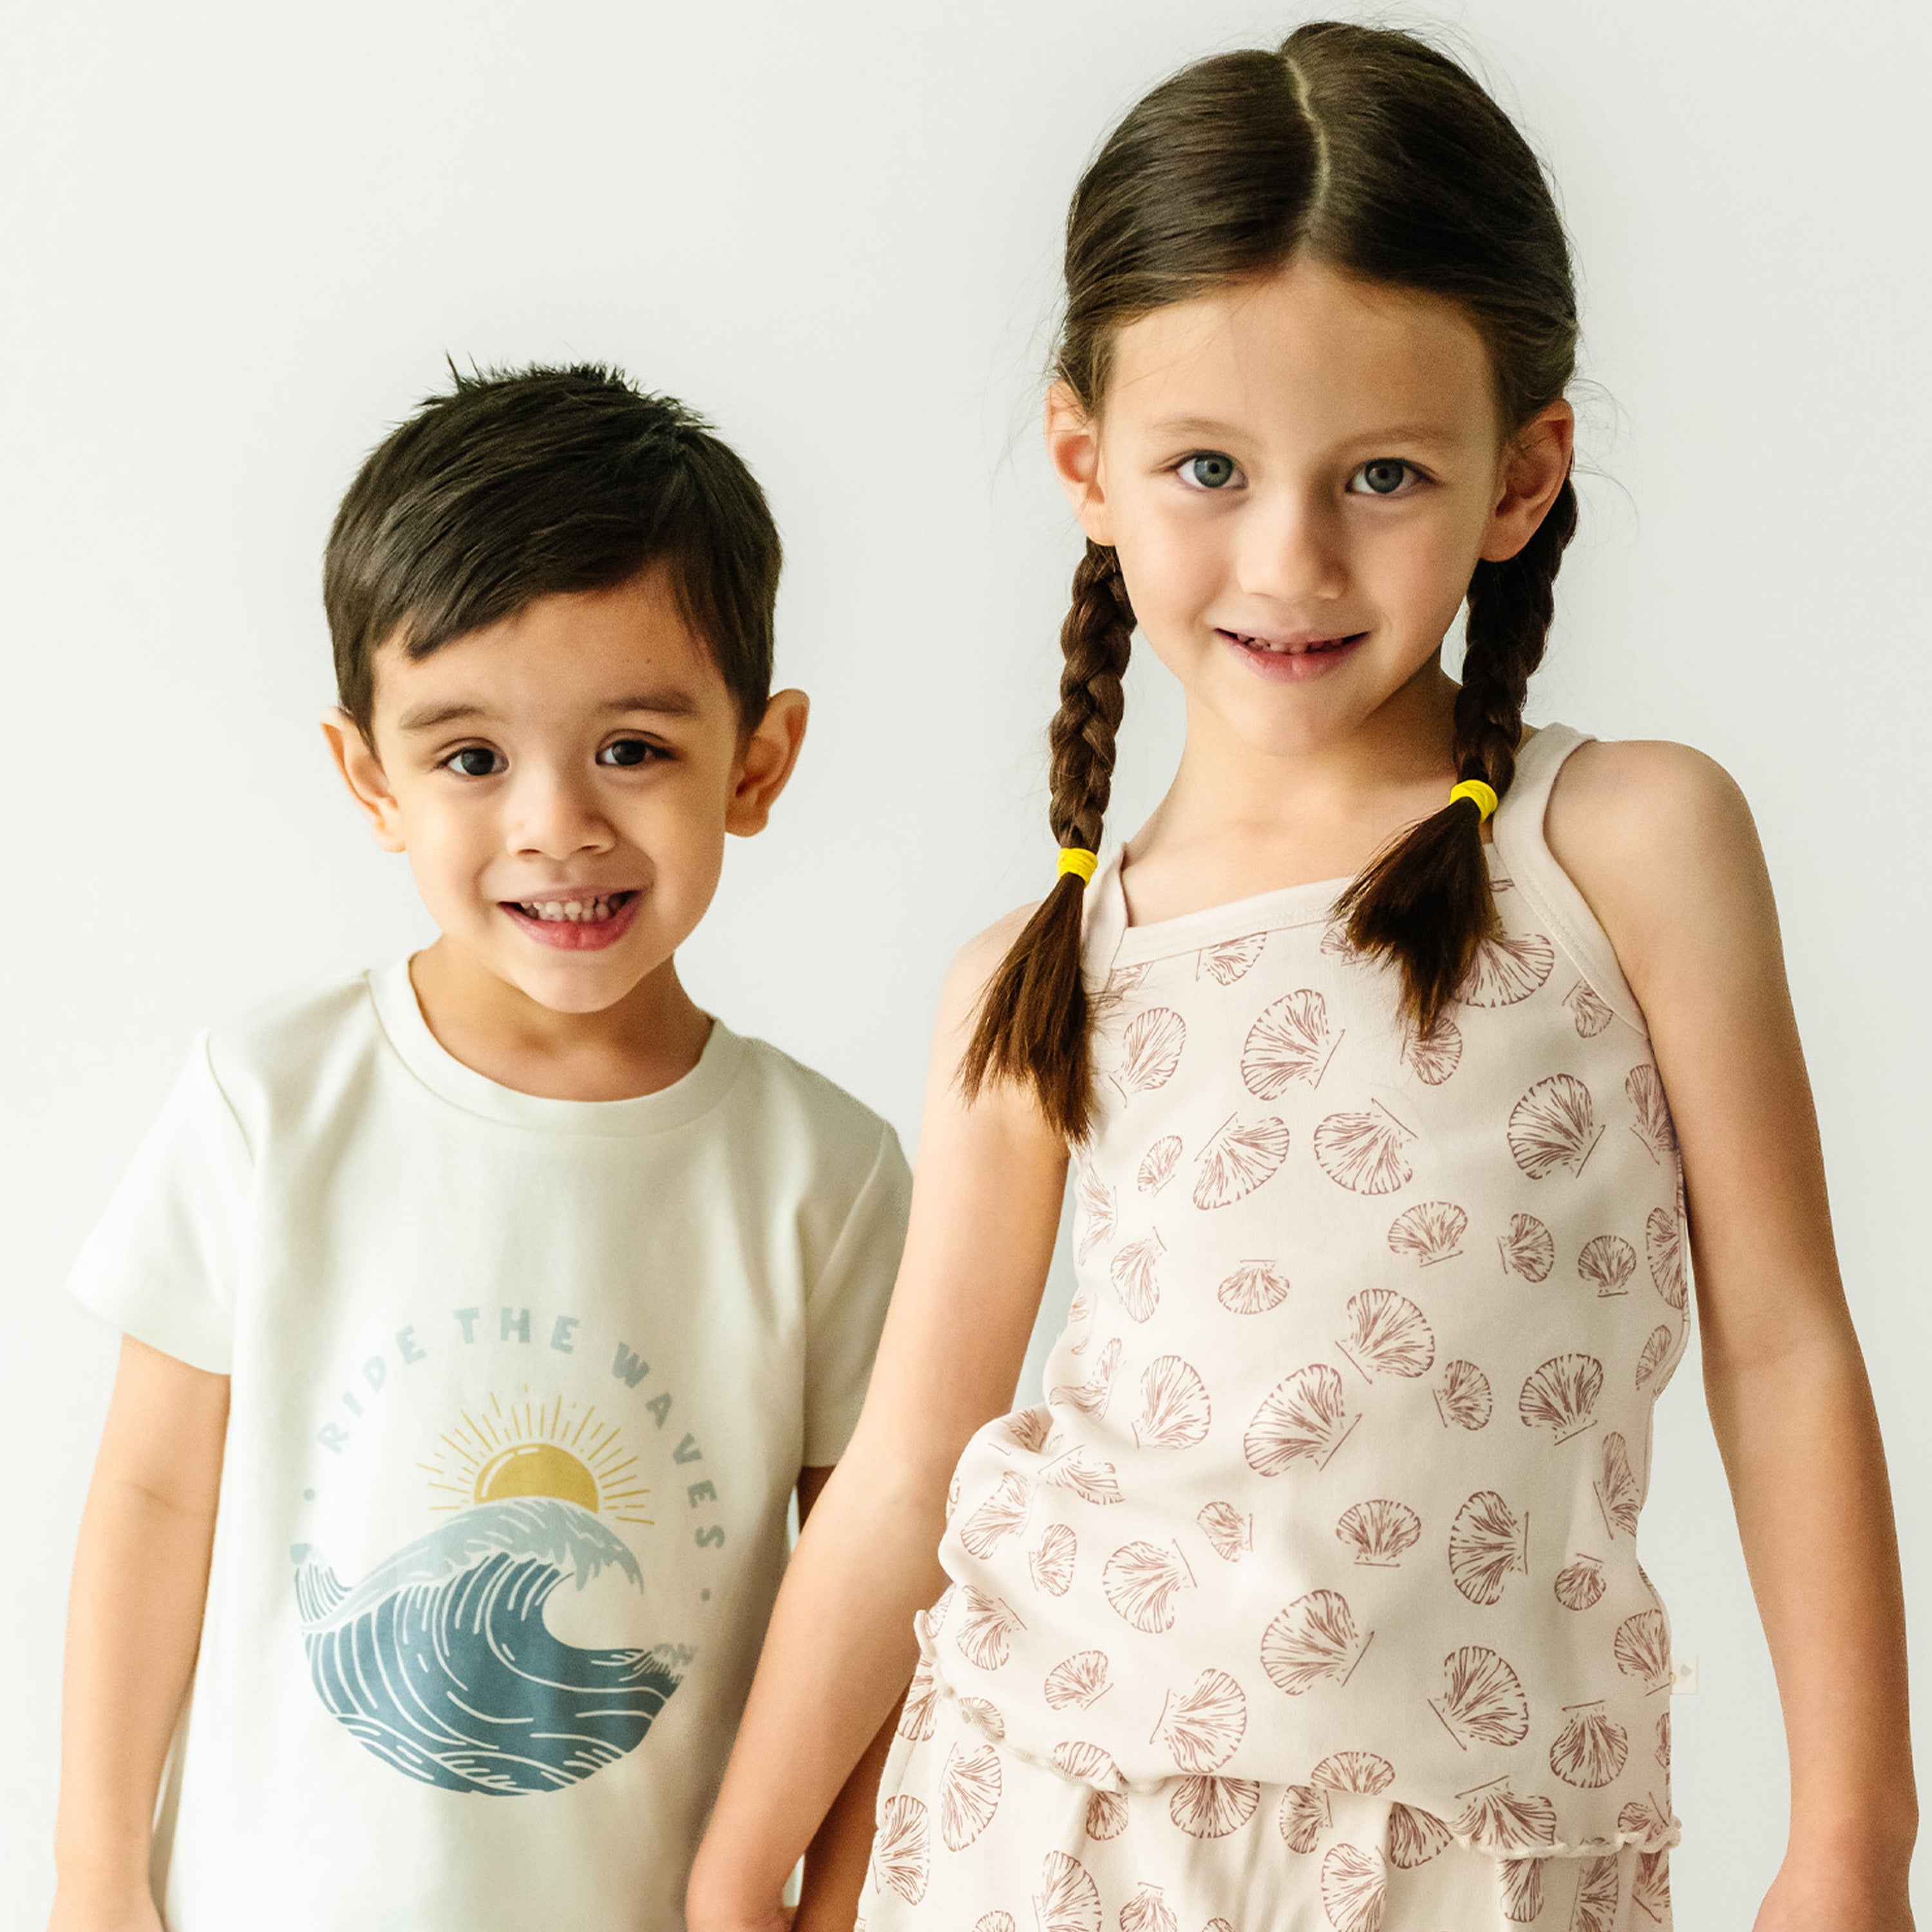 Two young children, a boy and a girl, stand smiling against a white background. the boy wears a white t-shirt with a wave graphic, and the girl wears the Organic Spaghetti Top & Shorts Set - Seashells by Makemake Organics.